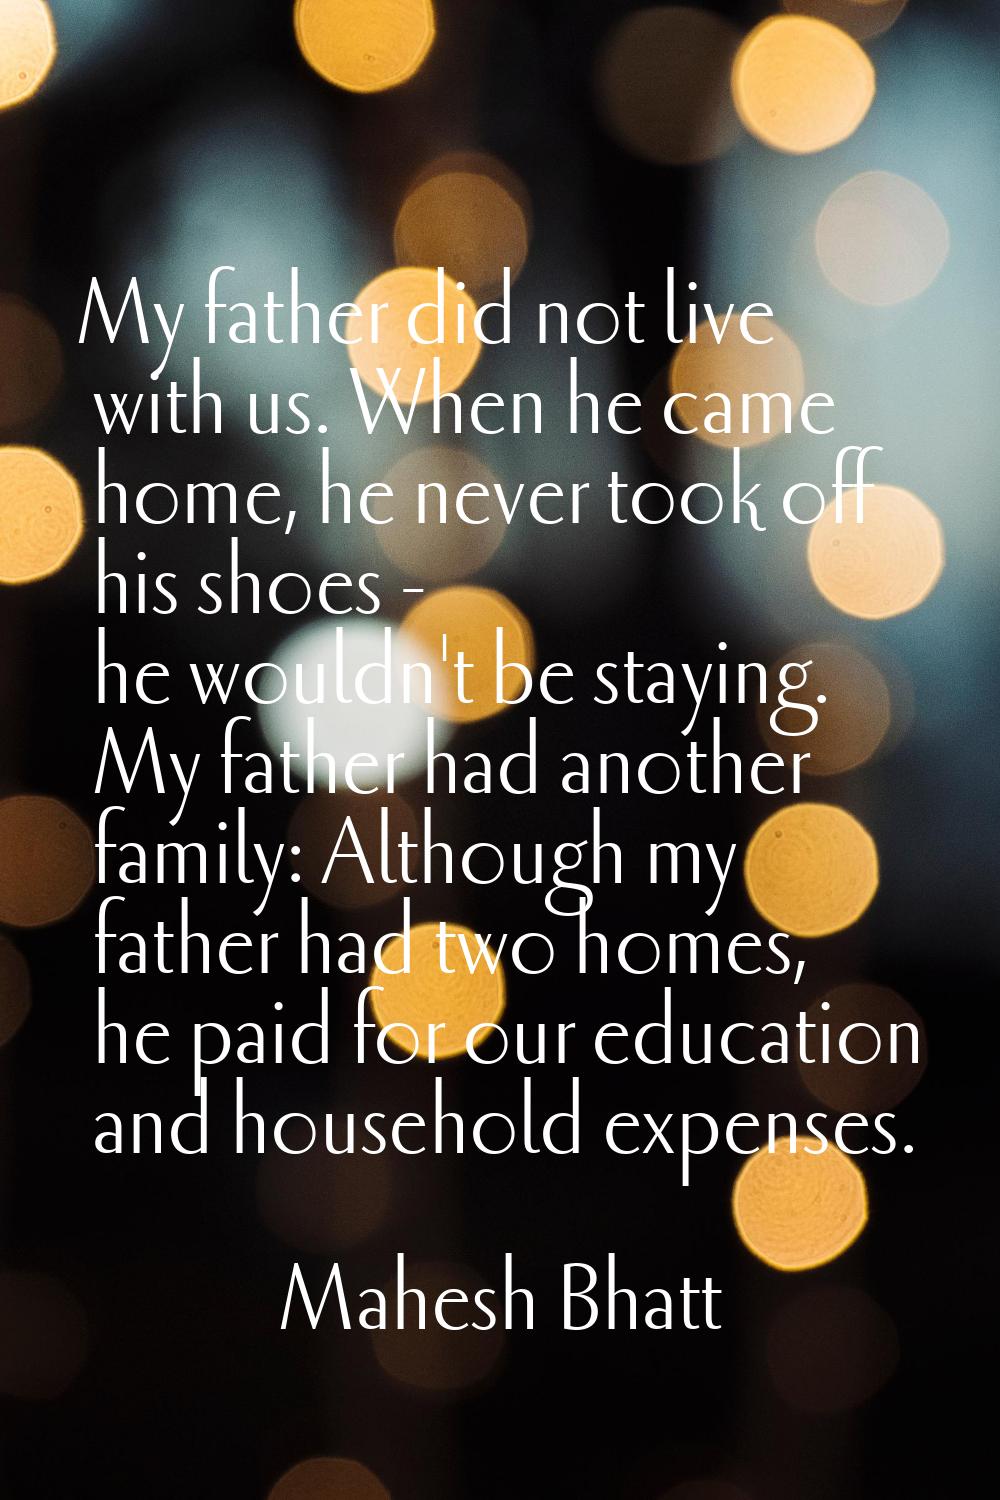 My father did not live with us. When he came home, he never took off his shoes - he wouldn't be sta